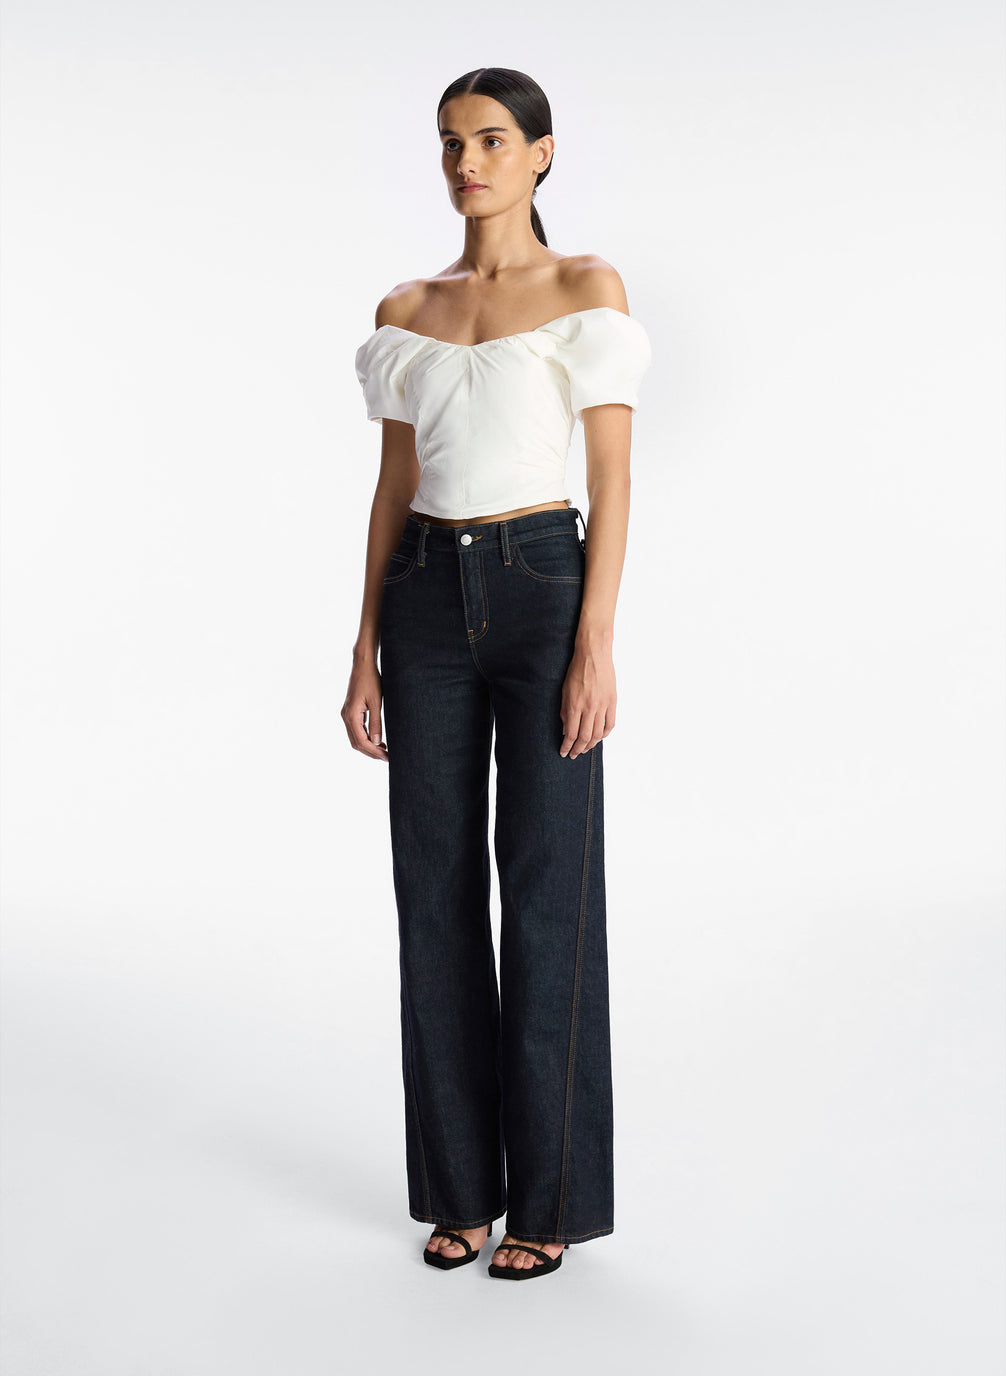 side view of woman wearing white off shoulder puff sleeve top and dark wash denim jeans